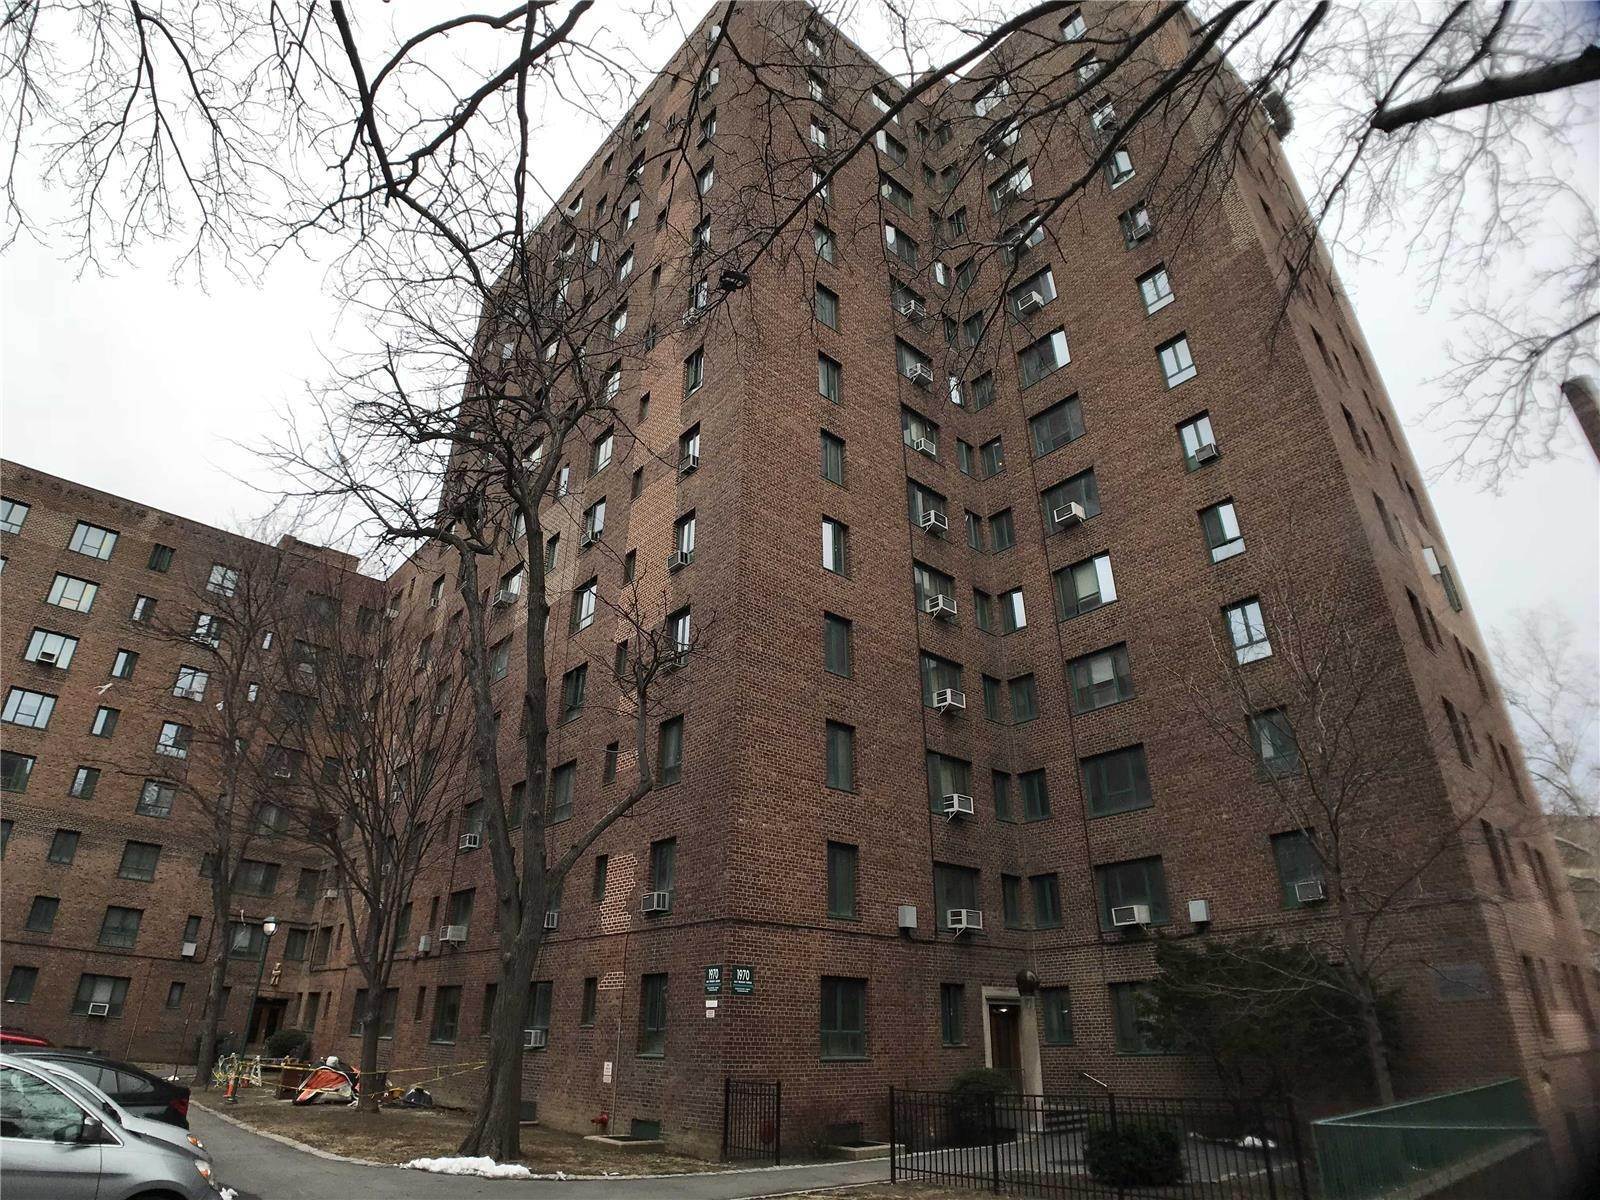 Parkchester, The building at 1970 East Tremont Avenue, Parkchester, Bronx, NY 10462